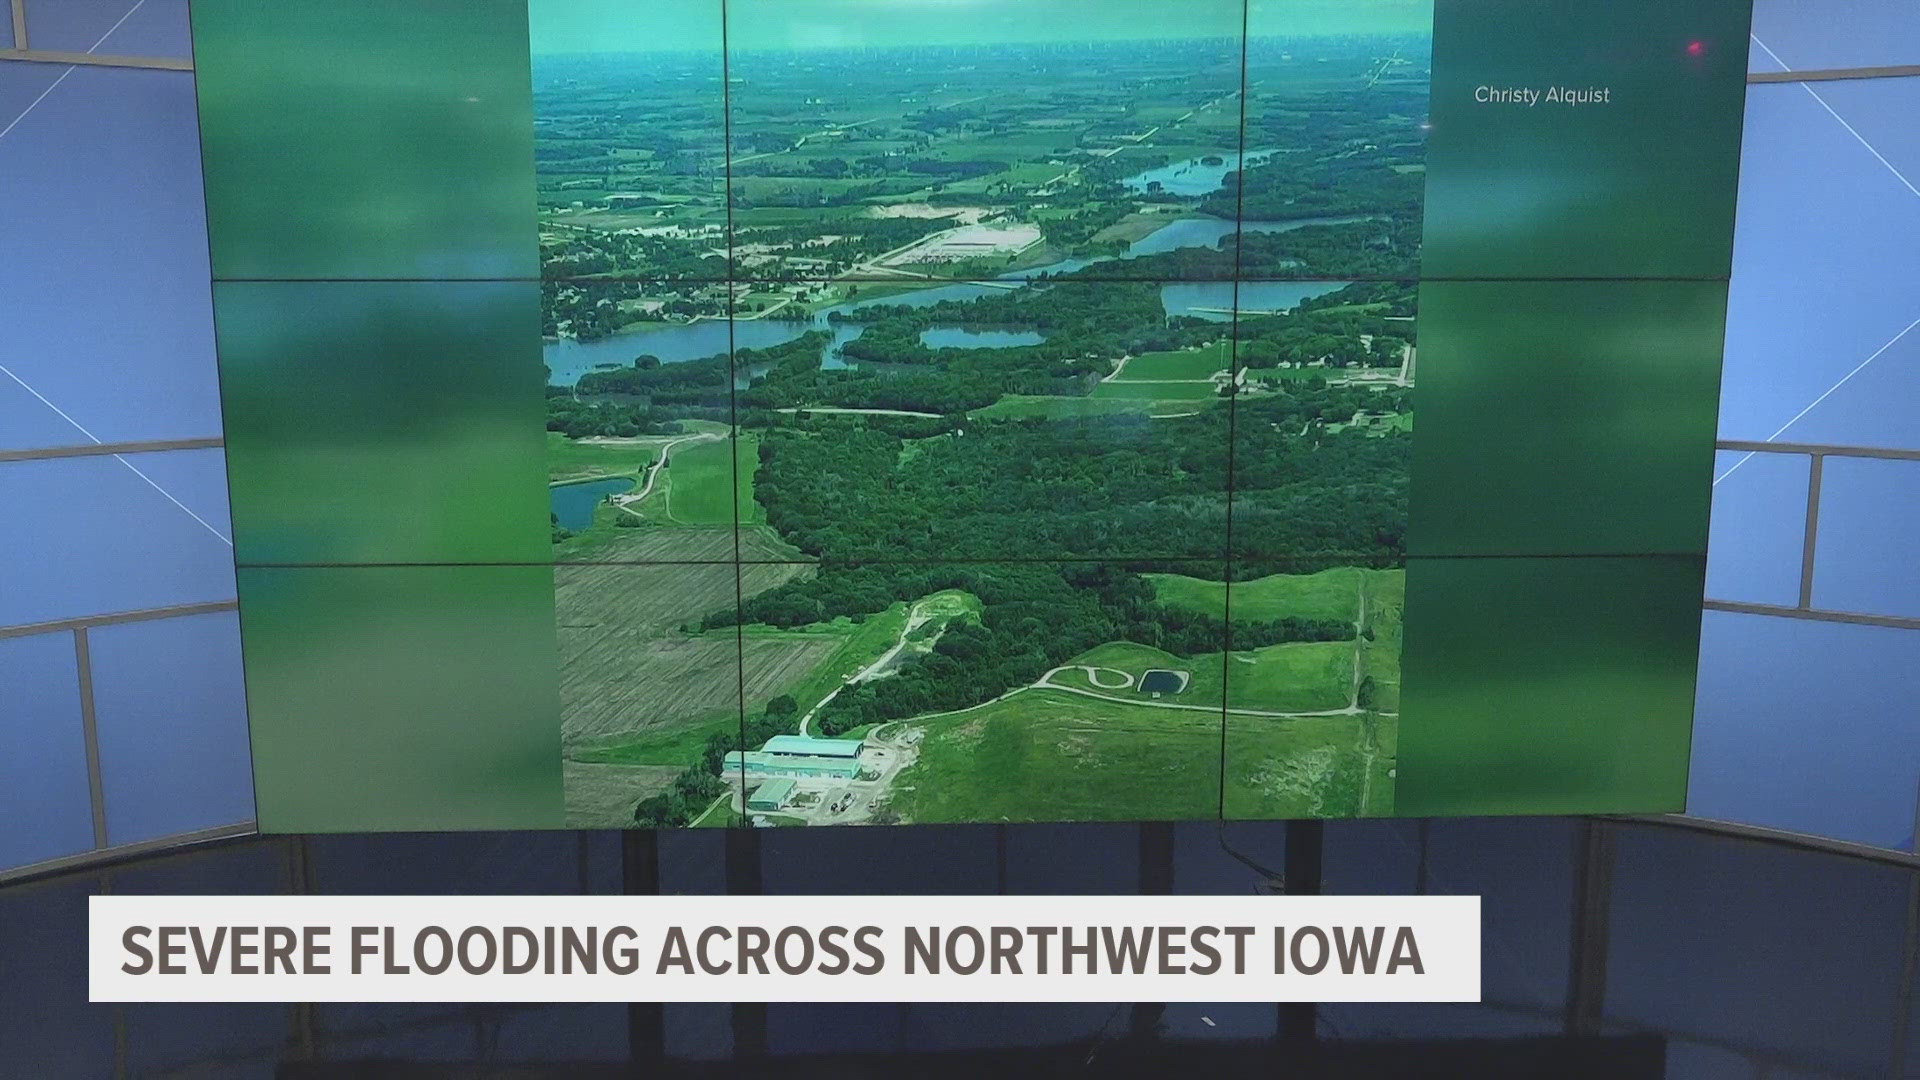 Severe flooding across the state occurred over the weekend.